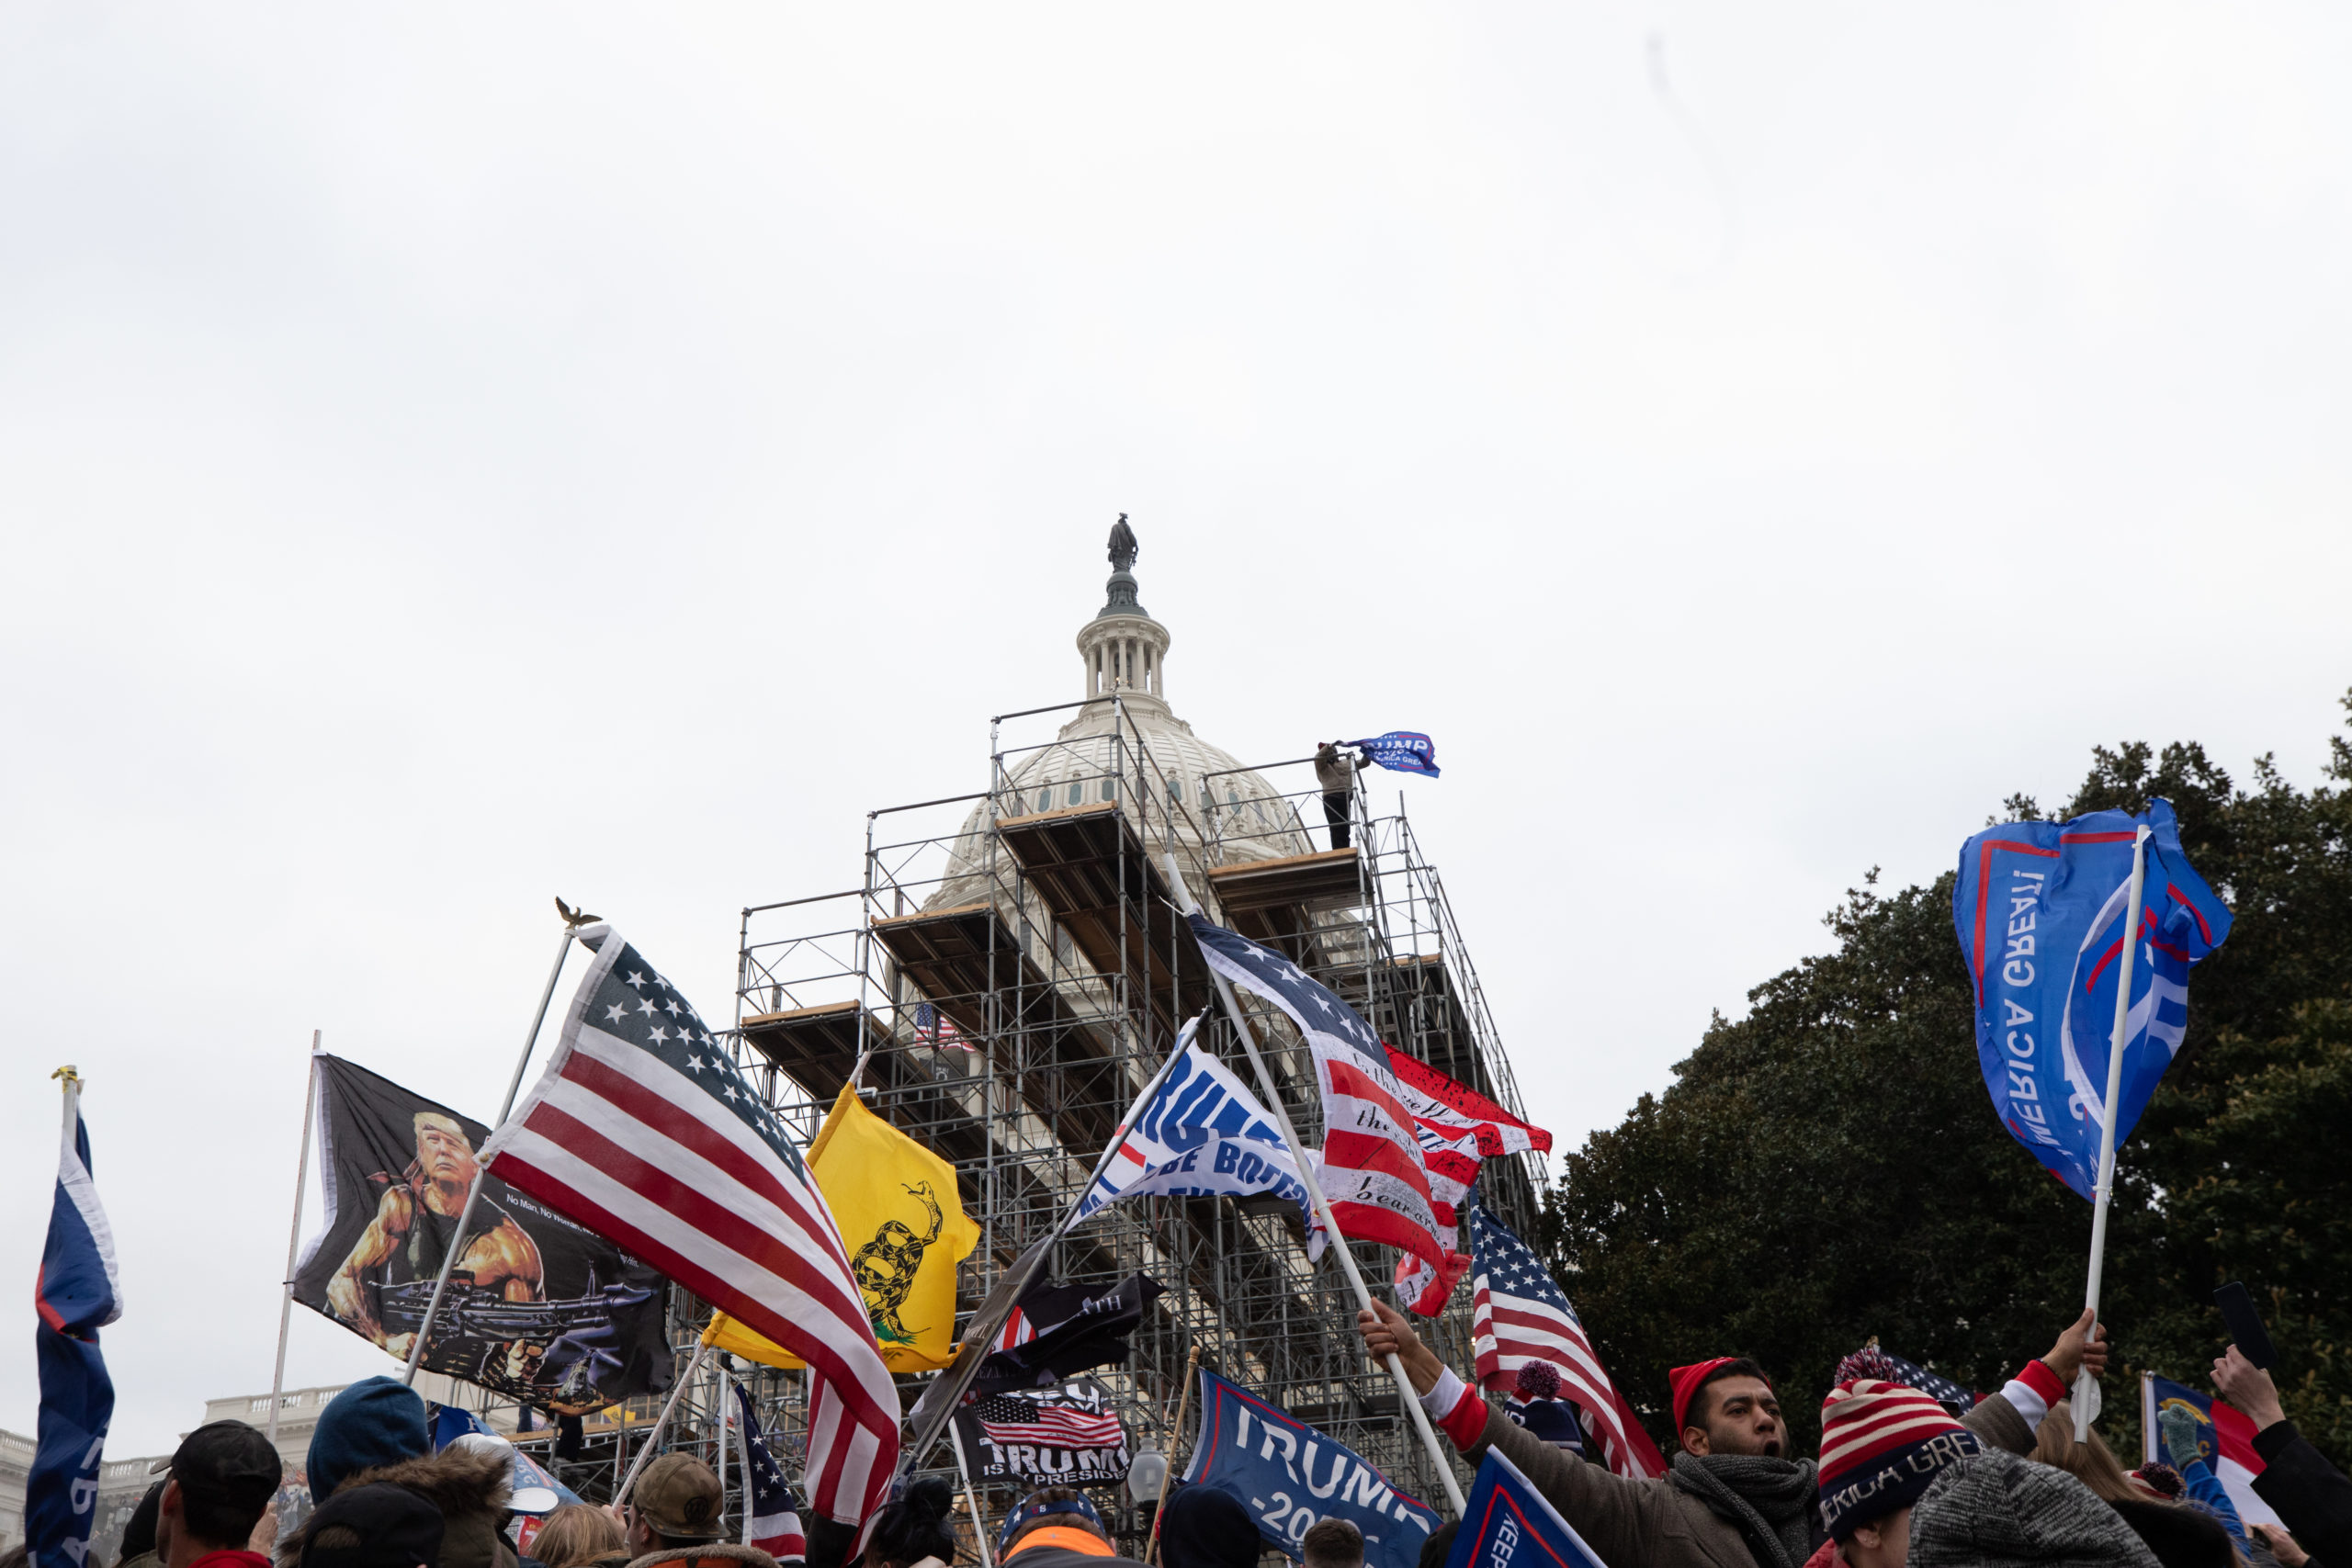 Pro-President Donald Trump supporters gathered at the U.S. Capitol building for a “stop the steal” protest in Washington, D.C. on Jan. 6, 2021. (Kaylee Greenlee – Daily Caller News Foundation)